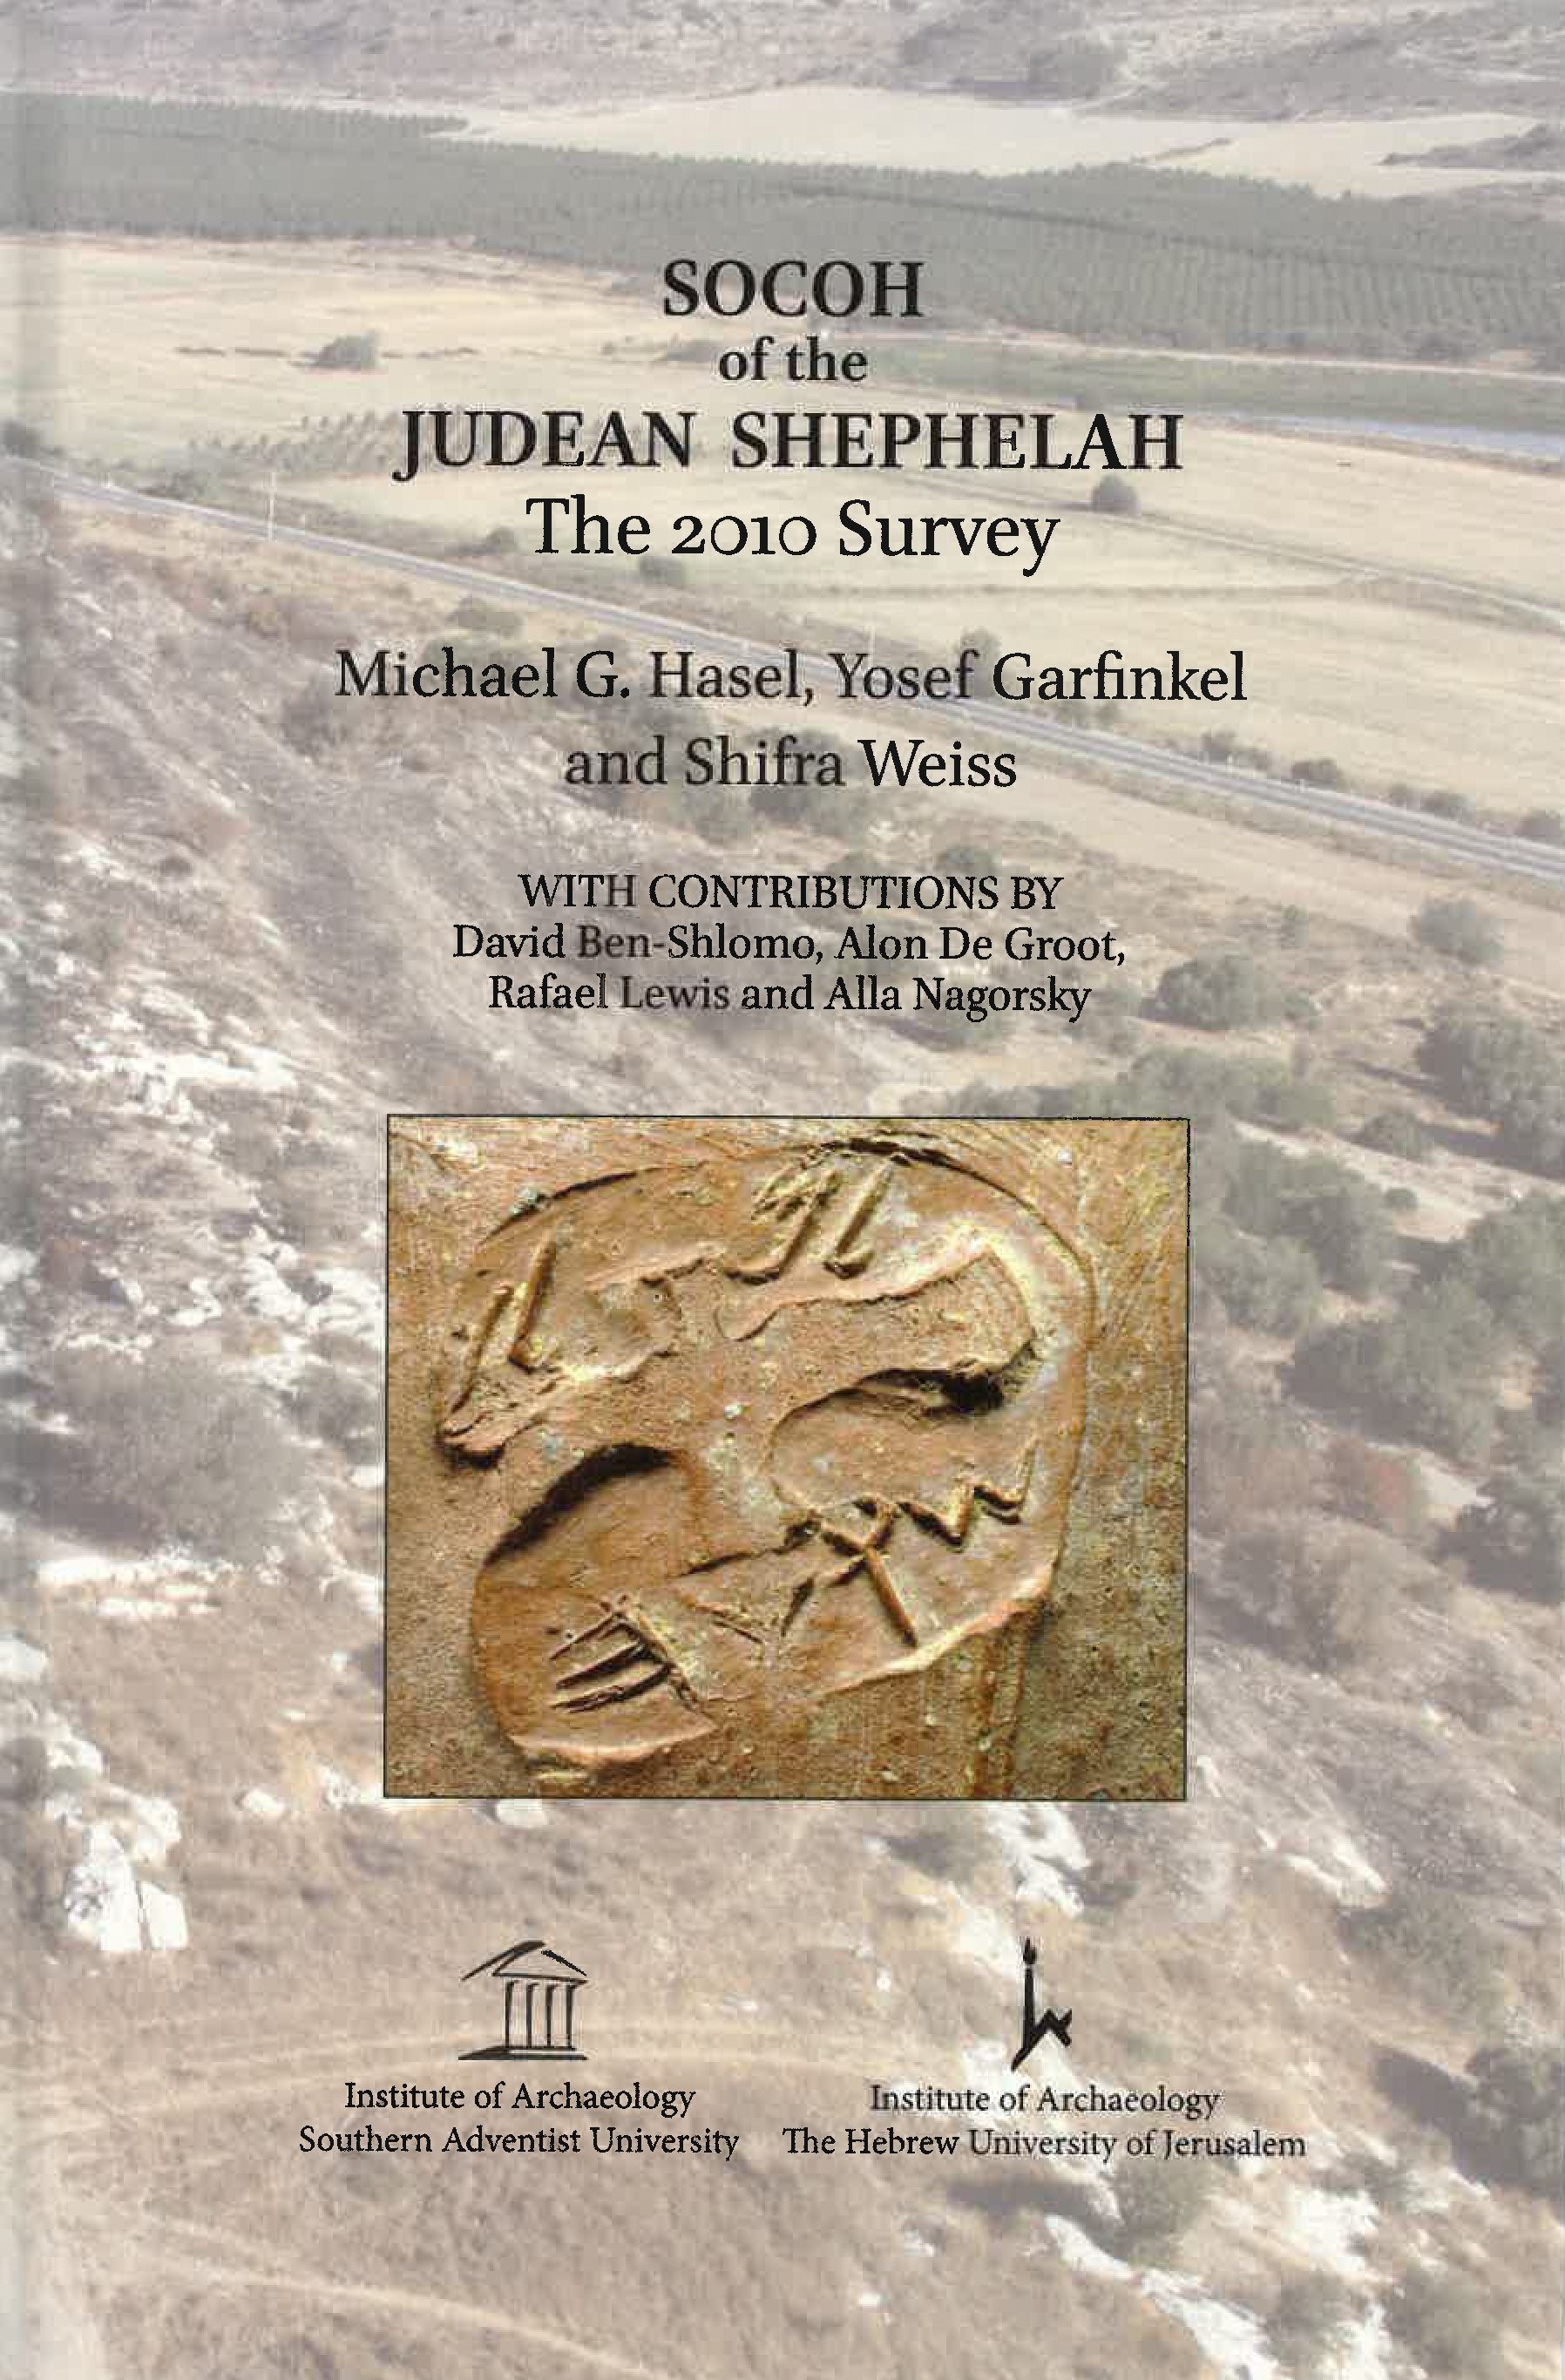 Michael G. Hasel, Yosef Garfinkel and Shifra Weiss
This is the first monograph dedicated to the site of Socoh. The study incorporates historical sources taht are listed and analyzed, including the Bible, ancient Near Eastern, Byzantine and Medieval records. $ 40.00